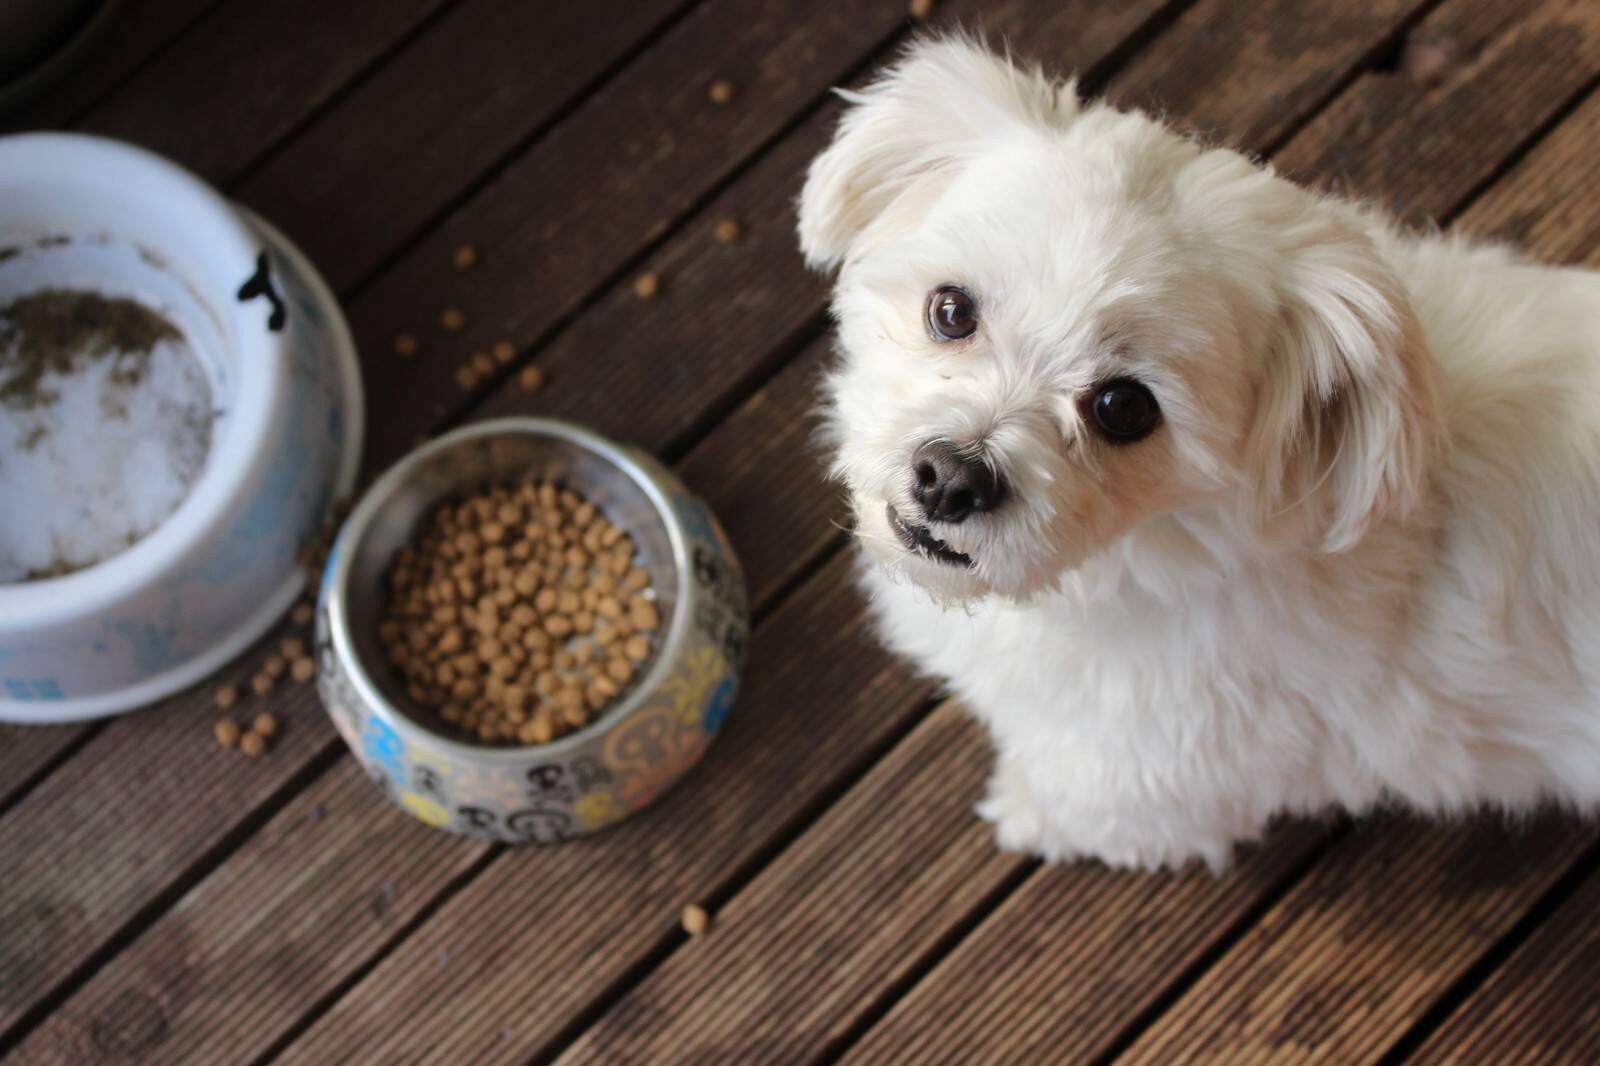 Why is your dog picky about food?